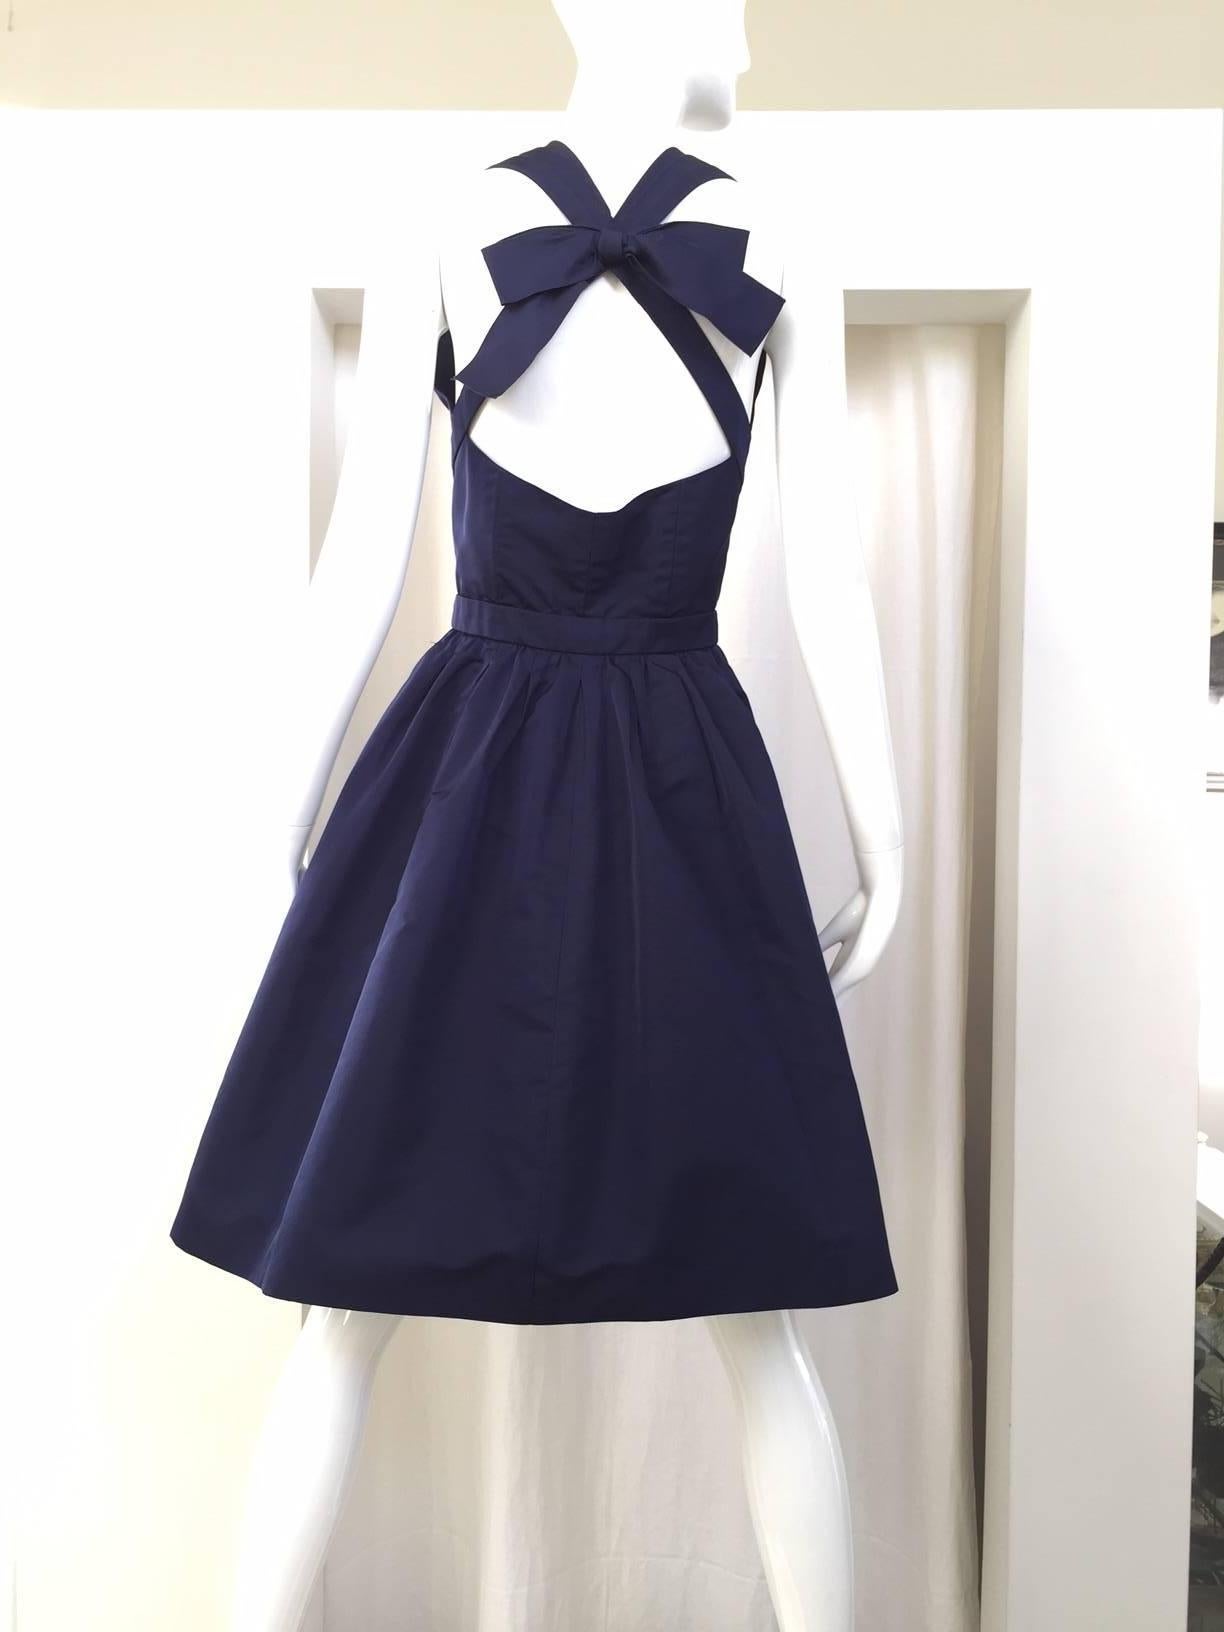 1980s CHANEL  blue cocktail silk dress with crisscross back with bow. 
Size: 2. Bust: 30"/ W: 24"/ Length: 38"
Fit: Small